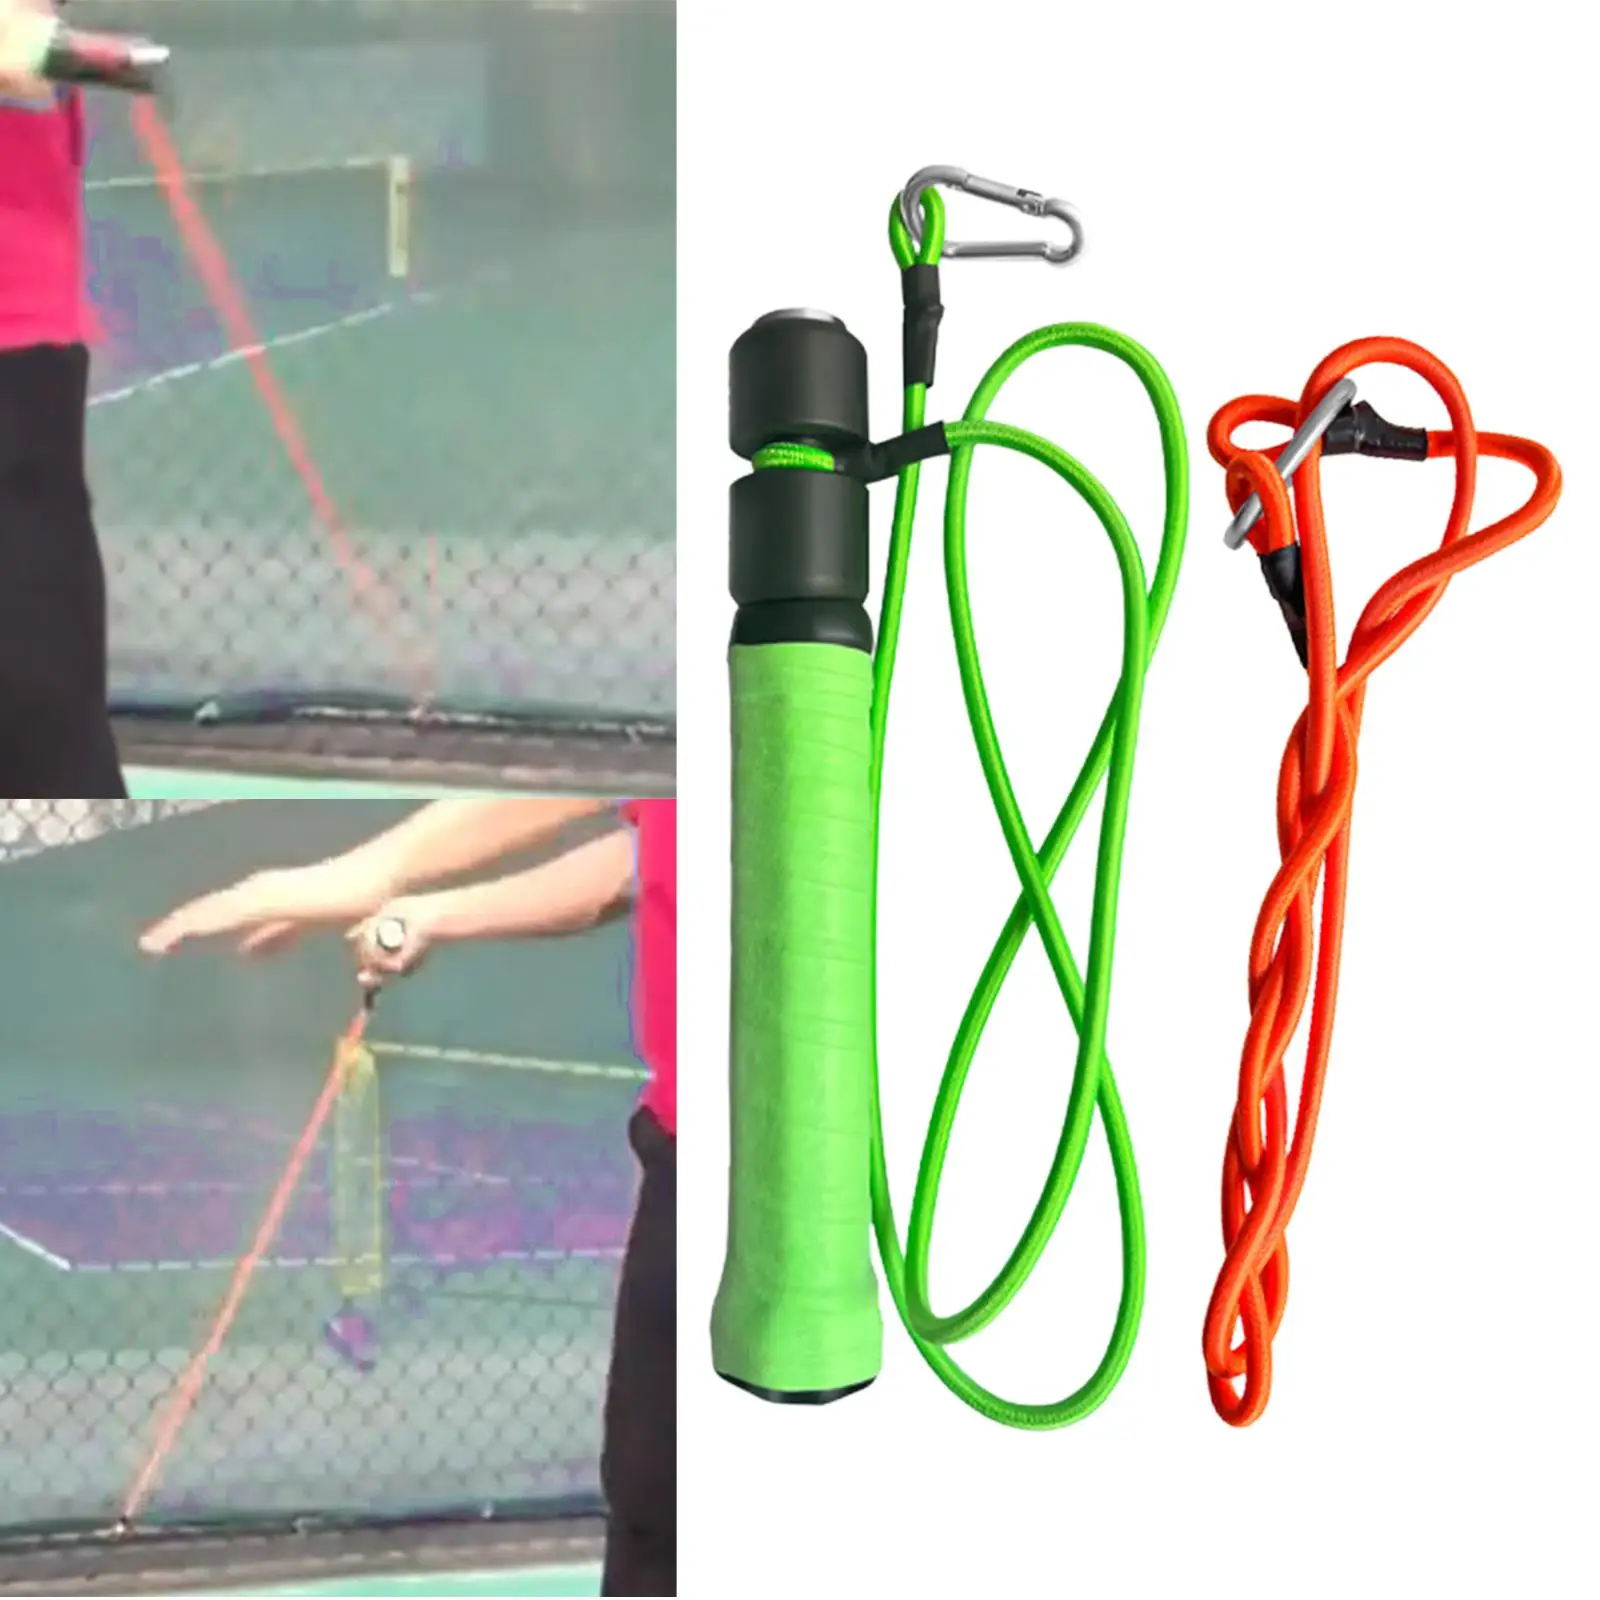 Tennis Trainer Belt Swing Practice Turn Around Sports Portable Exerciser for Football Volleyball Yoga Basketball Indoor Outdoor